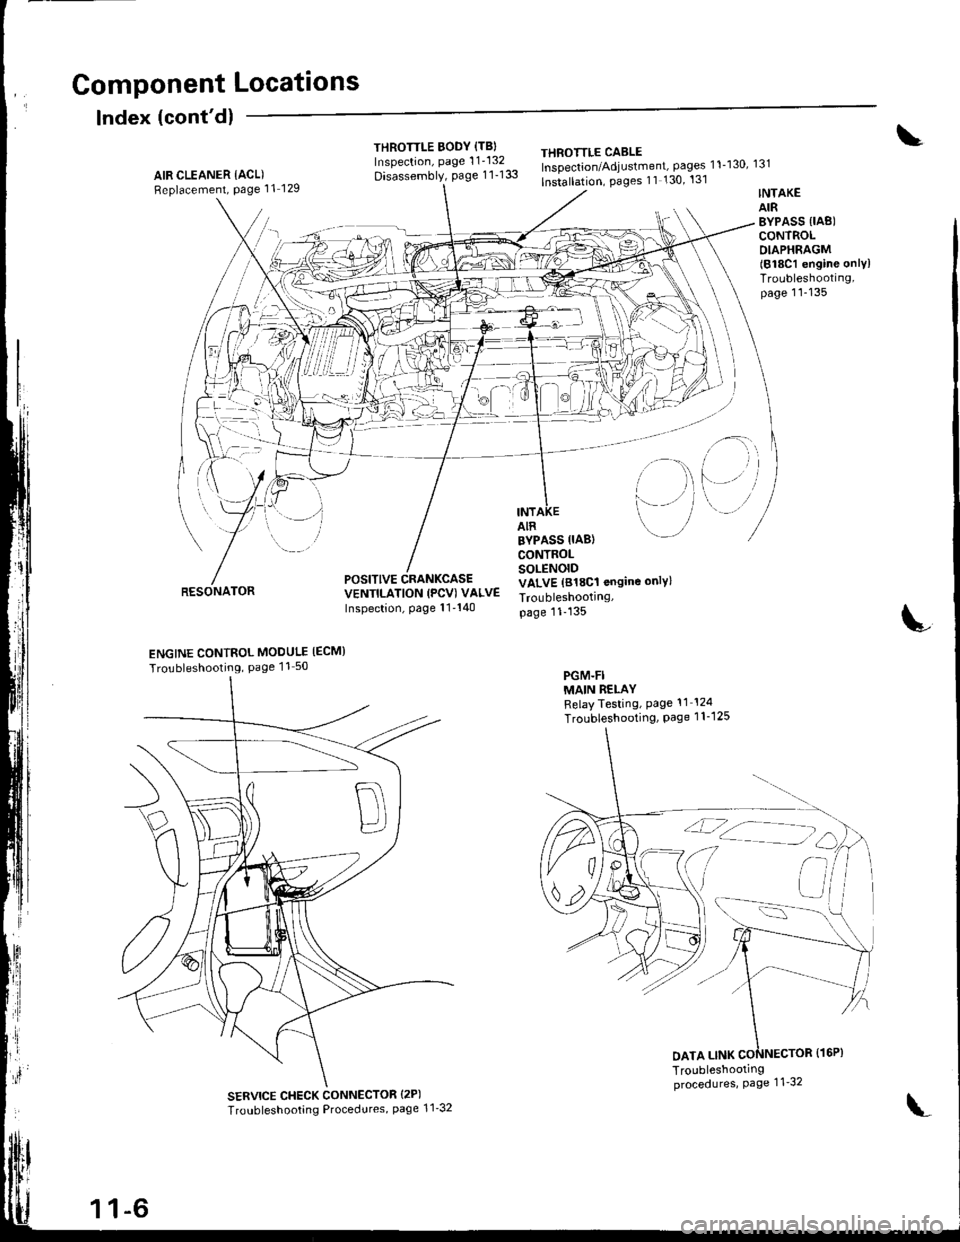 HONDA INTEGRA 1998 4.G Workshop Manual Gomponent Locations
Index (contdl
THROTTLE BODY {TBIInspection, page 1 1132
Disassembly, page 1 1-133
THEOTTLE CABLEInspection/Adjustment, pages 11-130, 131
lnstallation, Pages 11 130 131AIR CLEANE